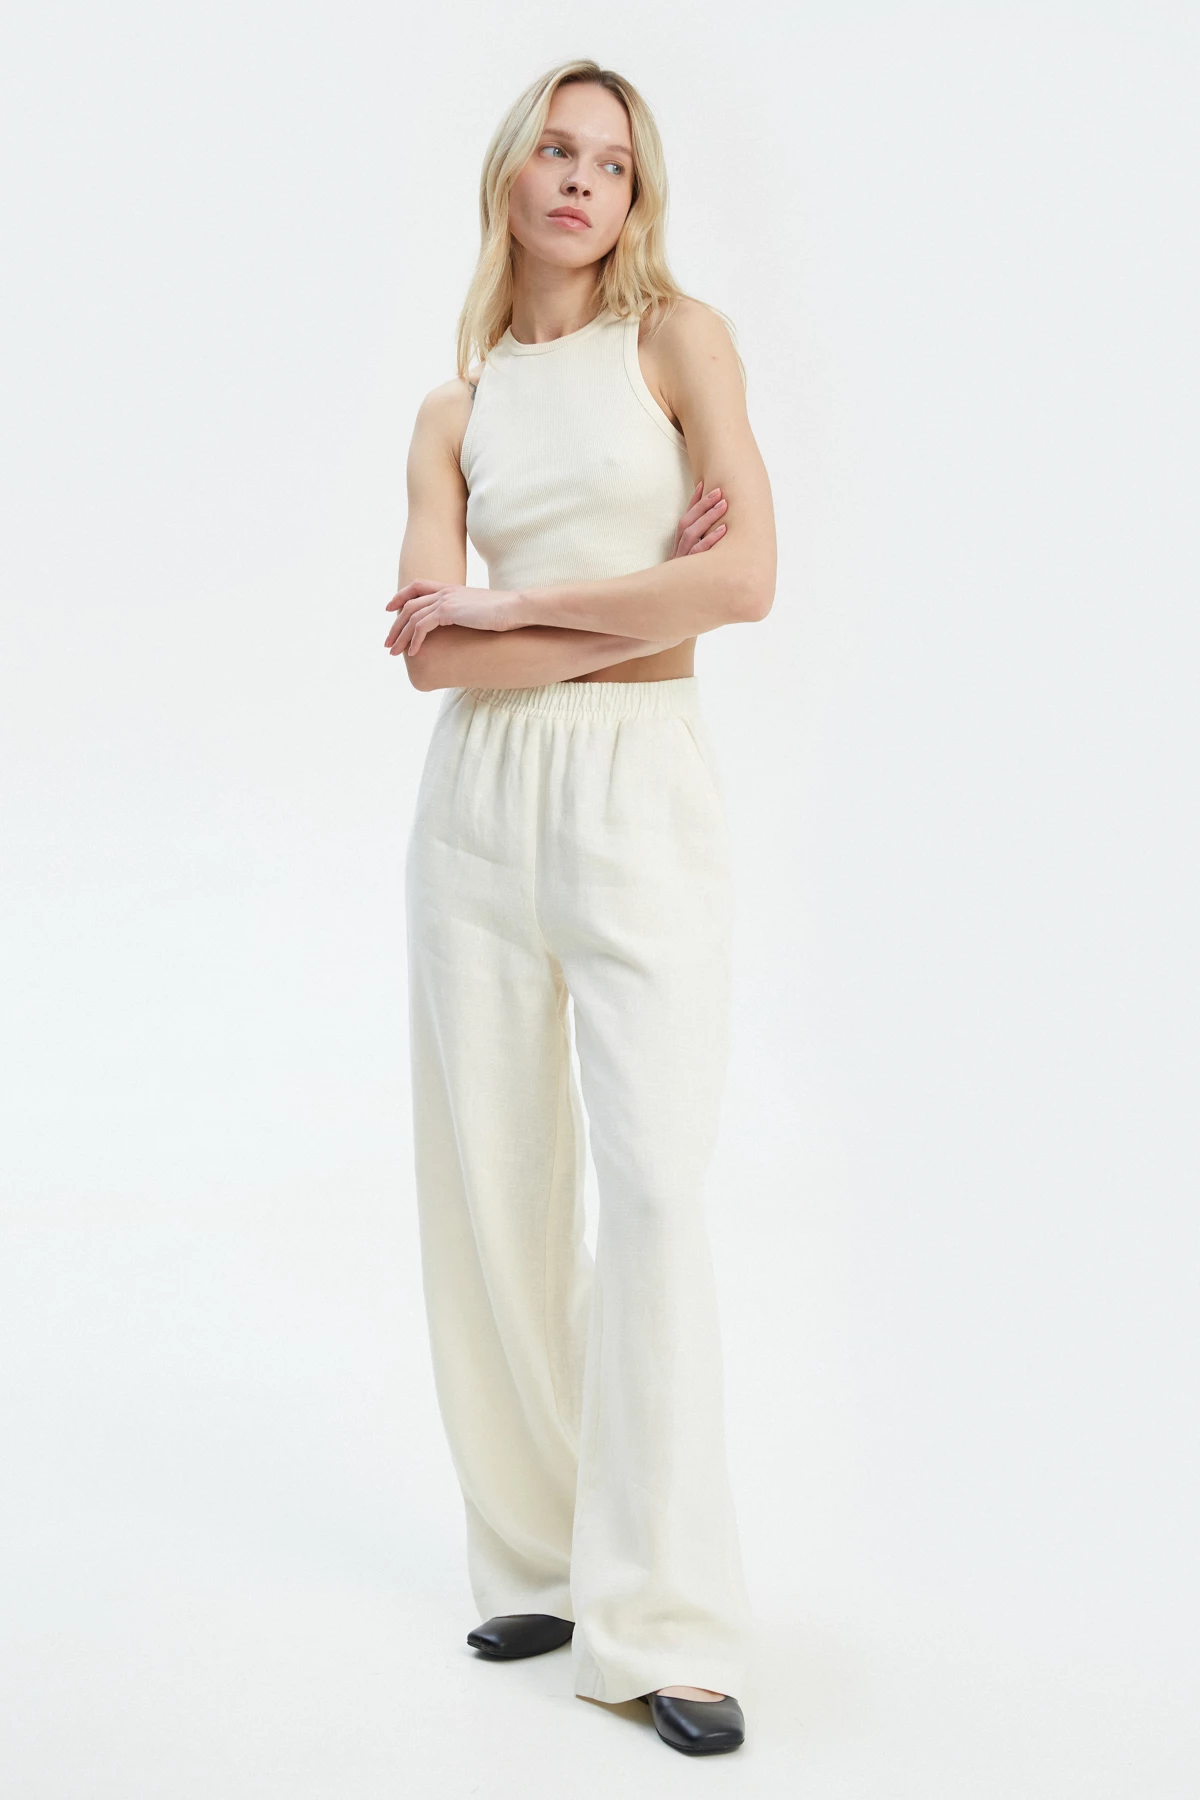 Milky loose-fit pants made of 100% linen, photo 2